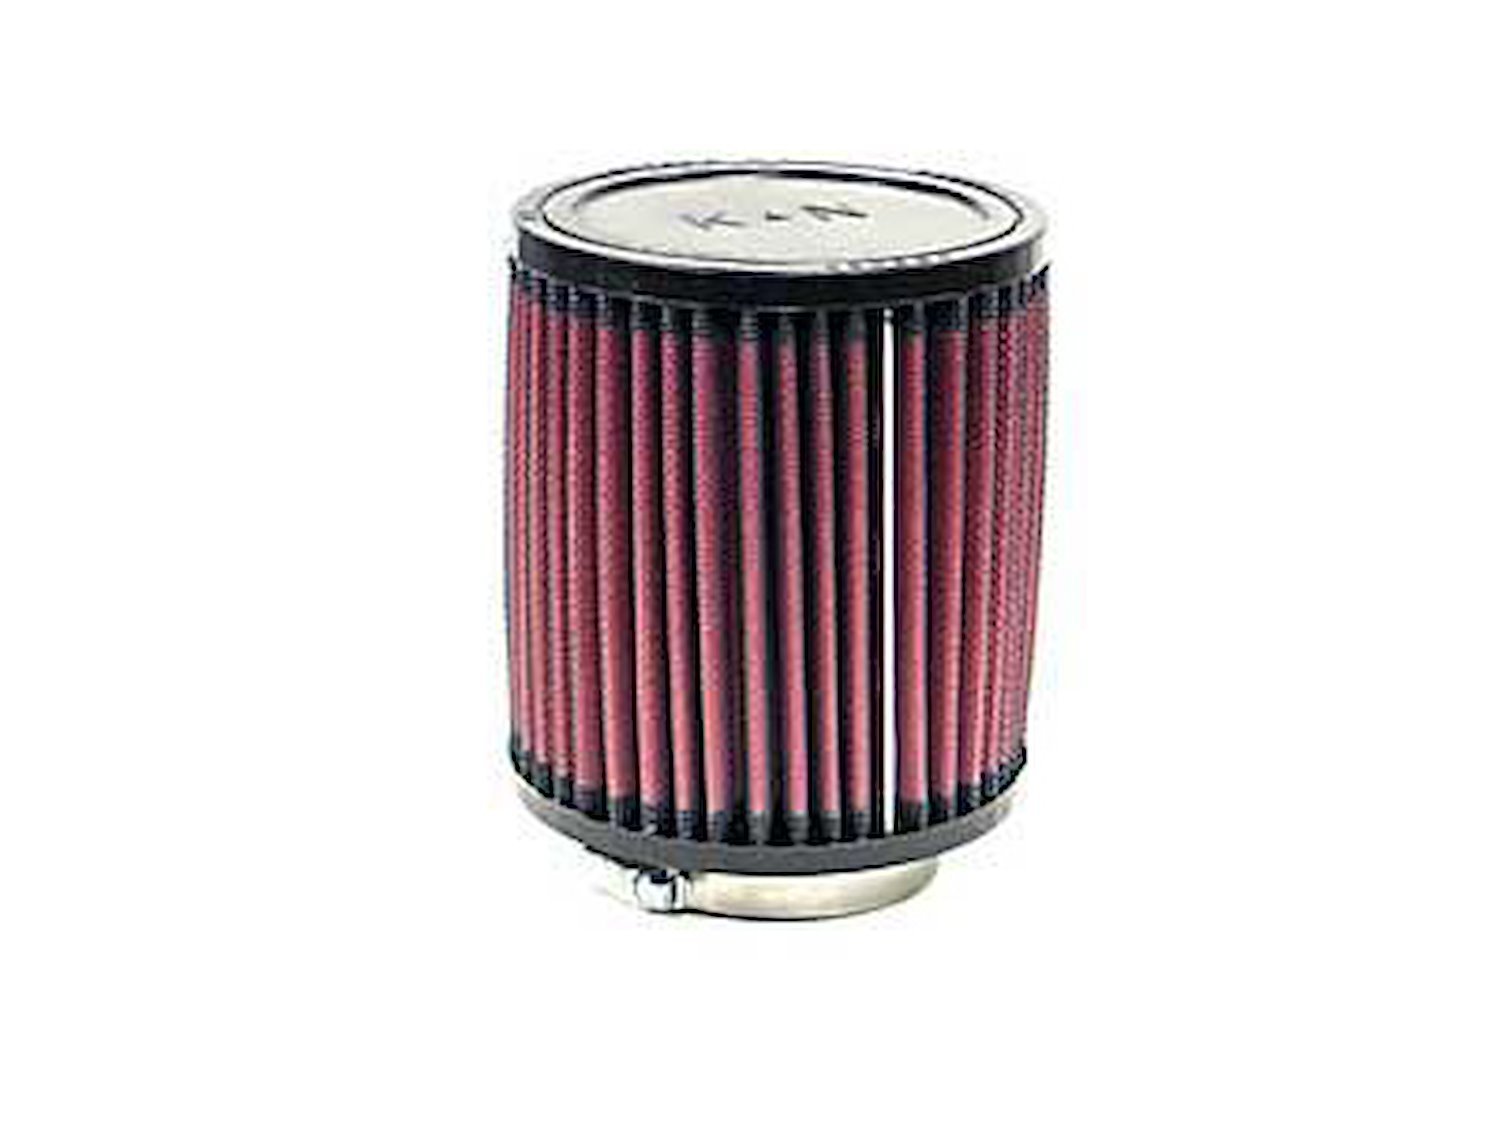 Round Straight Air Filter Flange Dia. (F): 2.563" (65 mm)